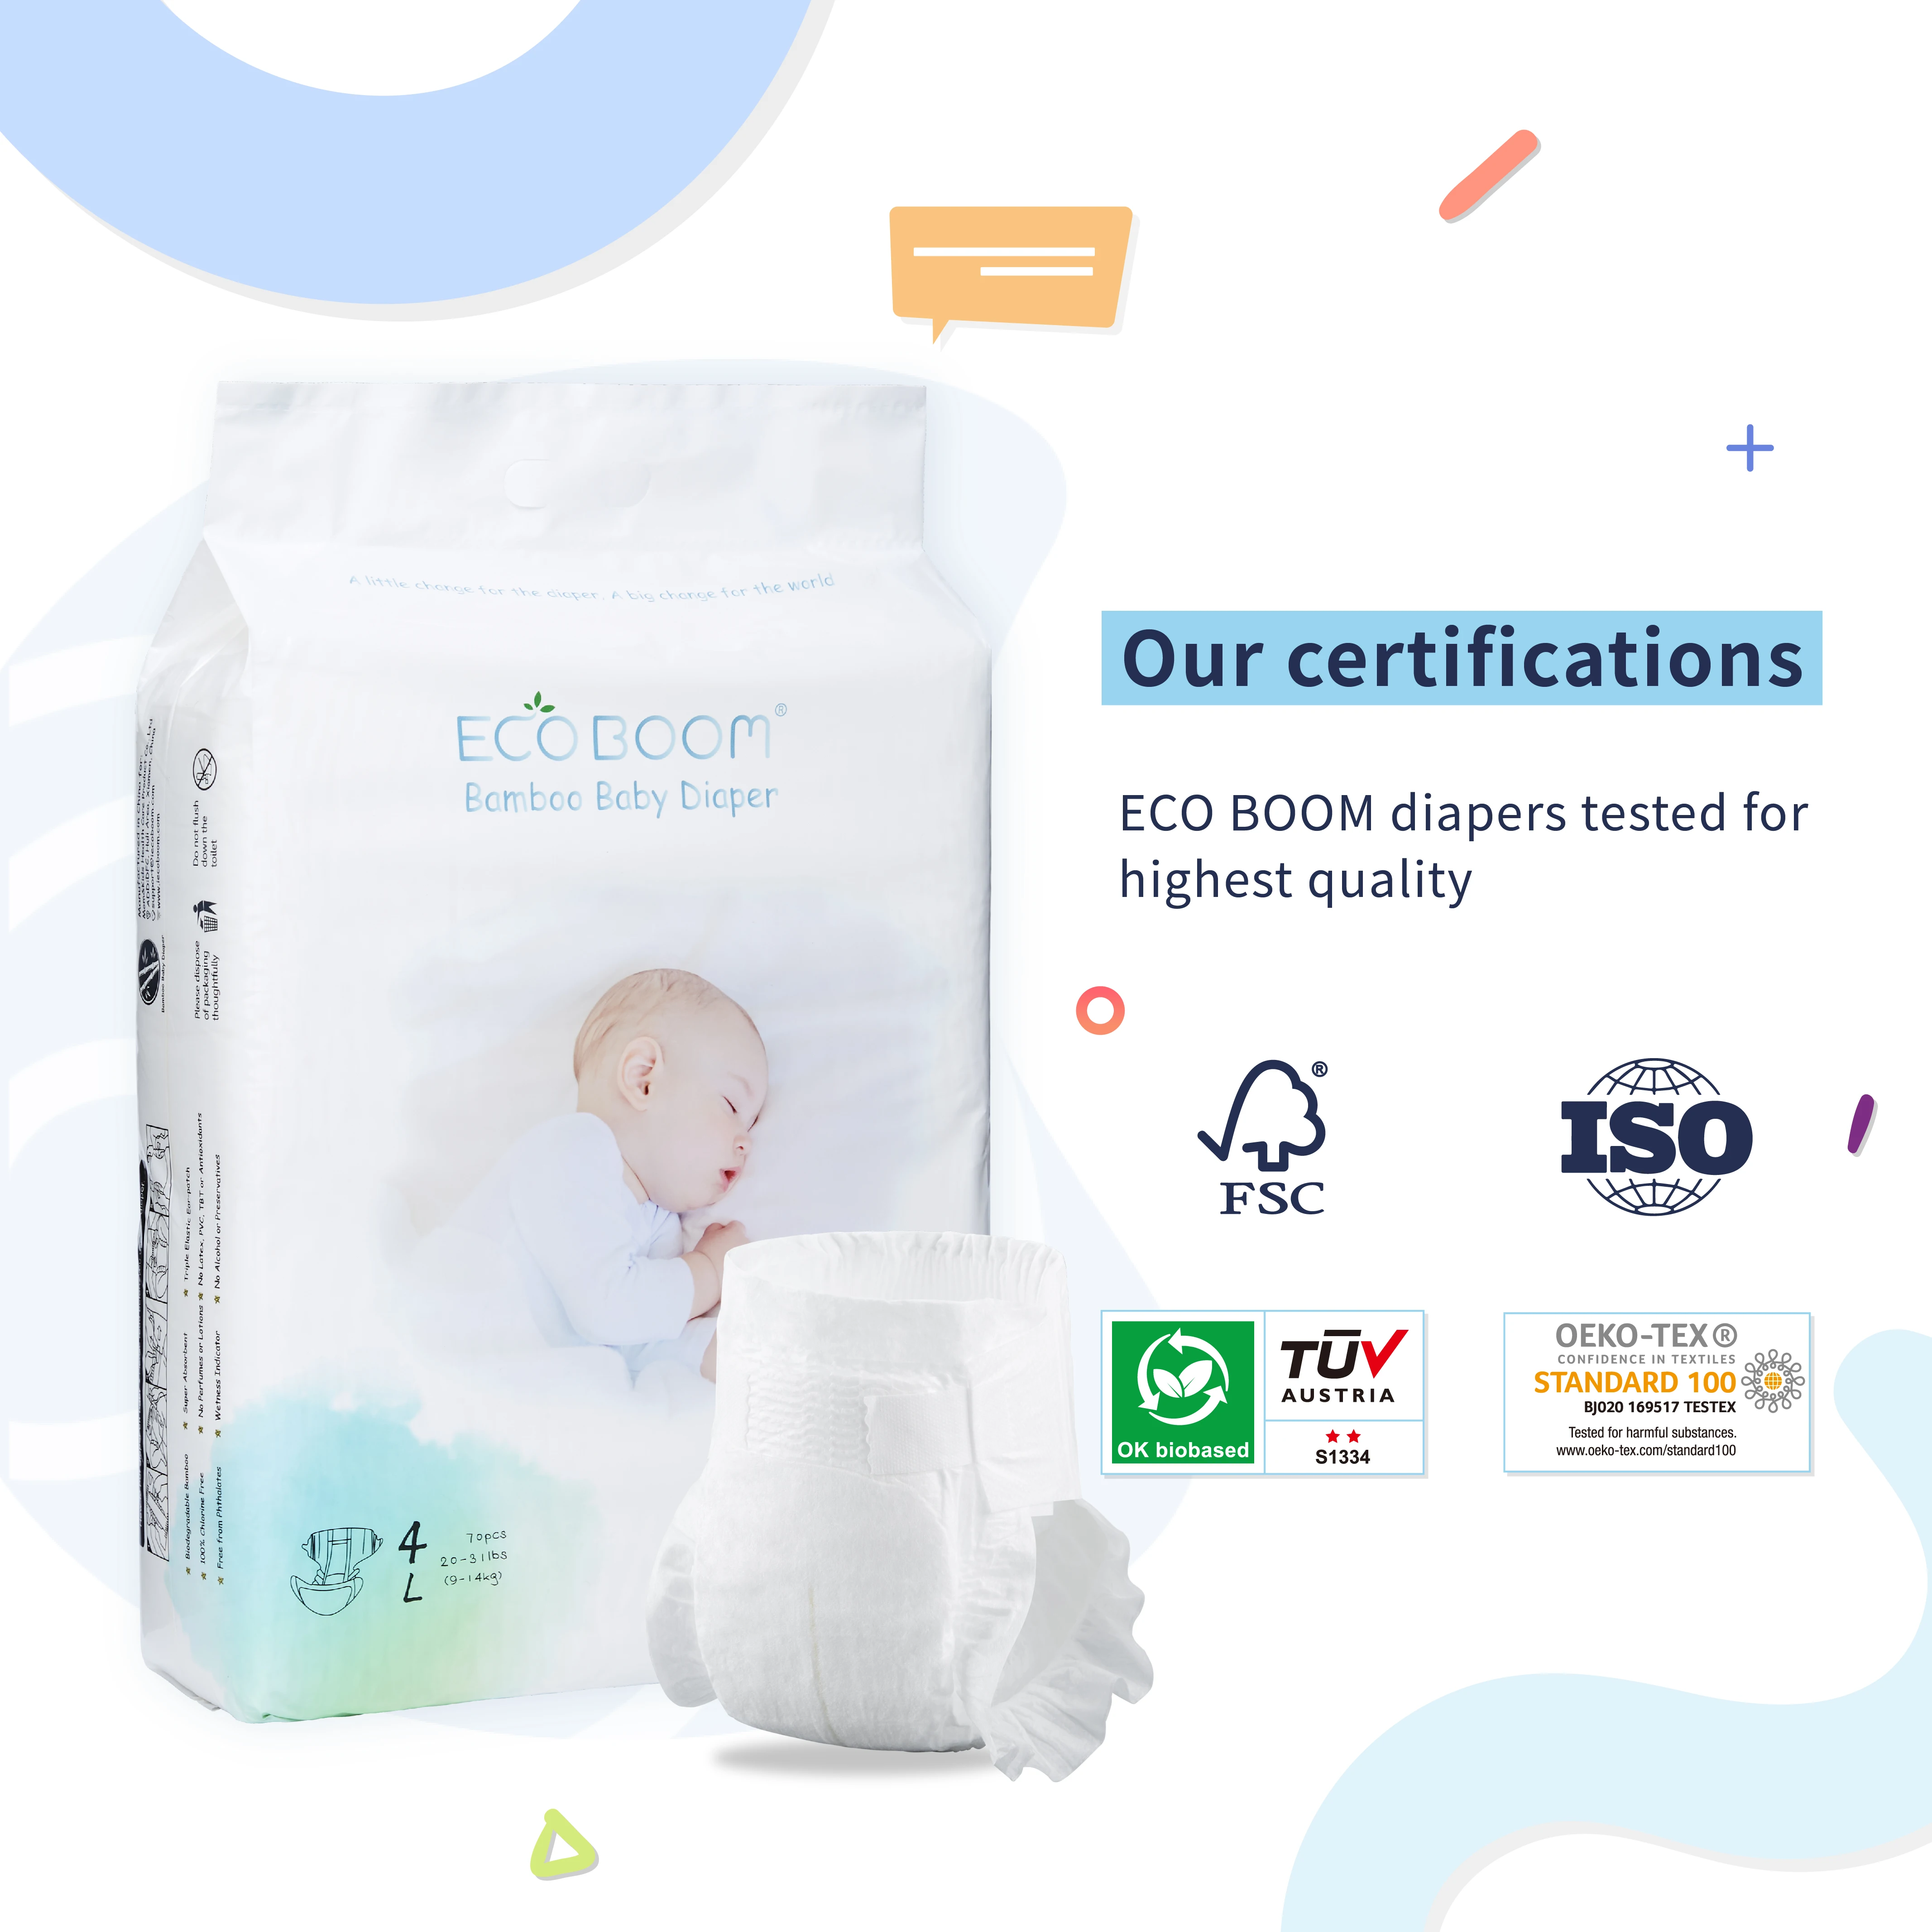 

ECO BOOM nappies bamboo newborn ecological baby eco diaper of best manufature, Pure white